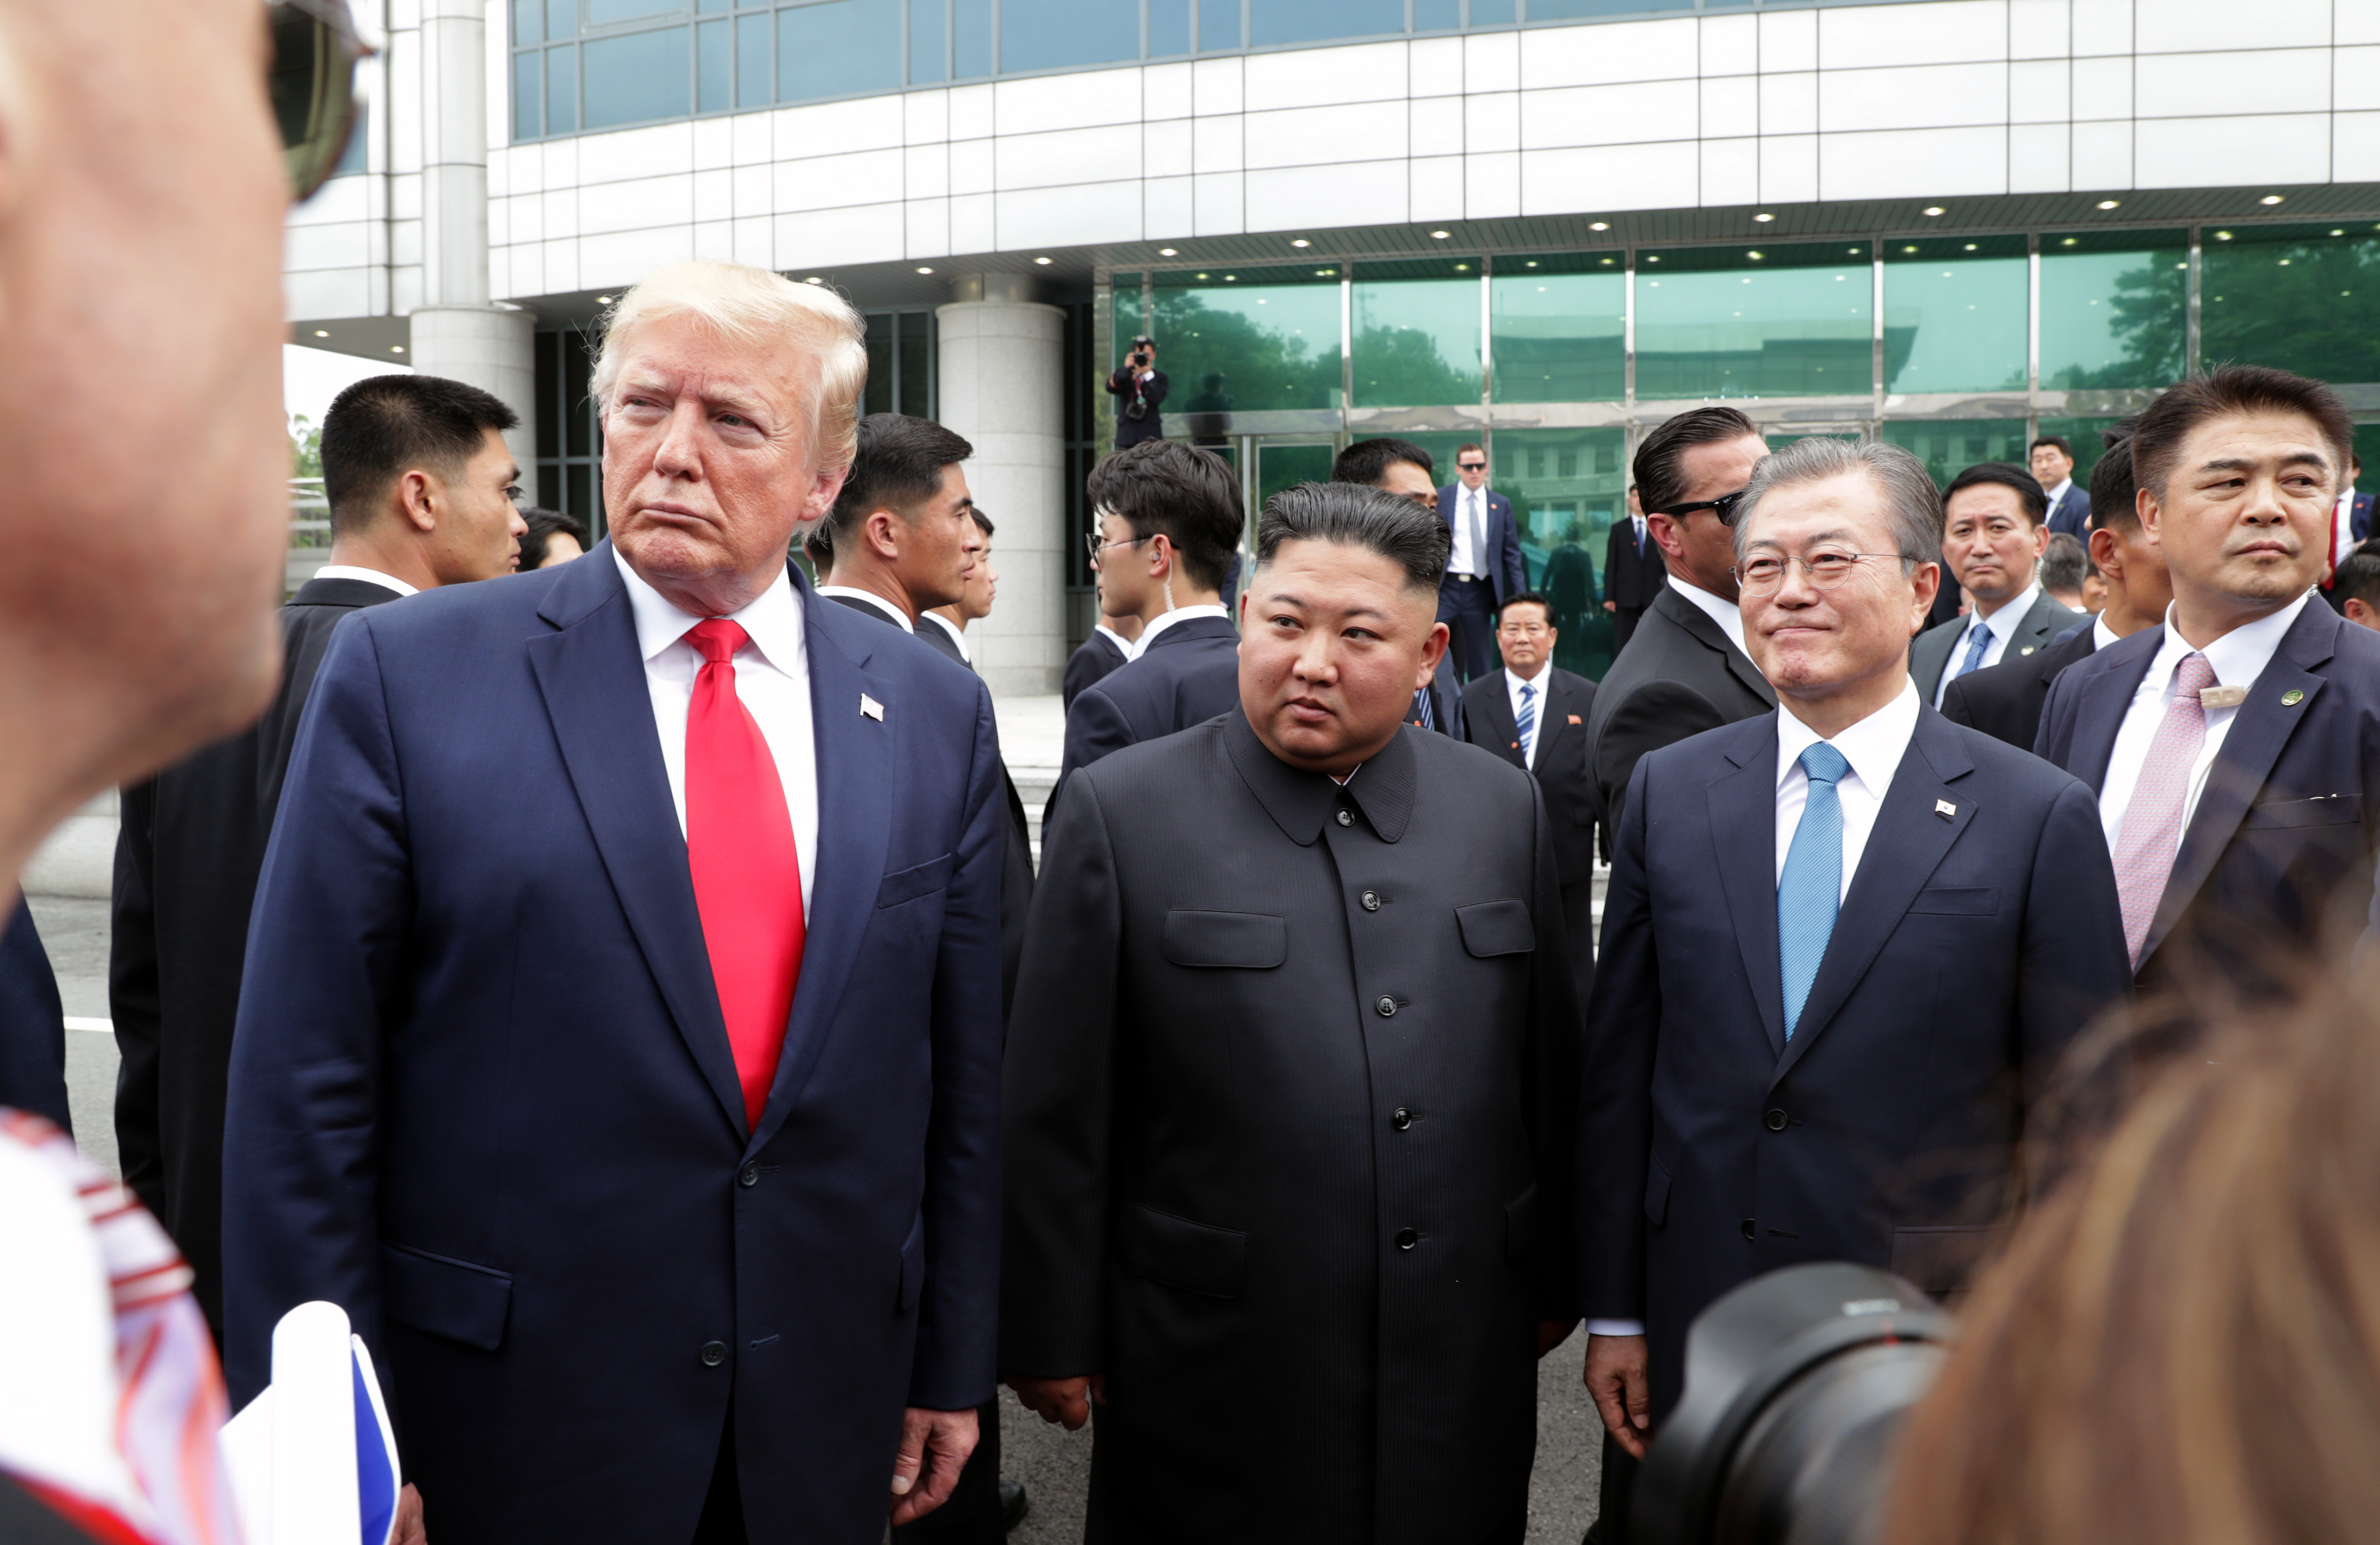 PANMUNJOM, SOUTH KOREA - JUNE 30: A handout photo provided by Dong-A Ilbo of North Korean leader Kim Jong Un, U.S. President Donald Trump, and South Korean President Moon Jae-in inside the demilitarized zone (DMZ) separating the South and North Korea on June 30, 2019 in Panmunjom, South Korea. U.S. President Donald Trump and North Korean leader Kim Jong-un briefly met at the Korean demilitarized zone (DMZ) on Sunday, with an intention to revitalize stalled nuclear talks and demonstrate the friendship between both countries. The encounter was the third time Trump and Kim have gotten together in person as both leaders have said they are committed to the "complete denuclearization" of the Korean peninsula. (Photo by Handout/Dong-A Ilbo via Getty Images)